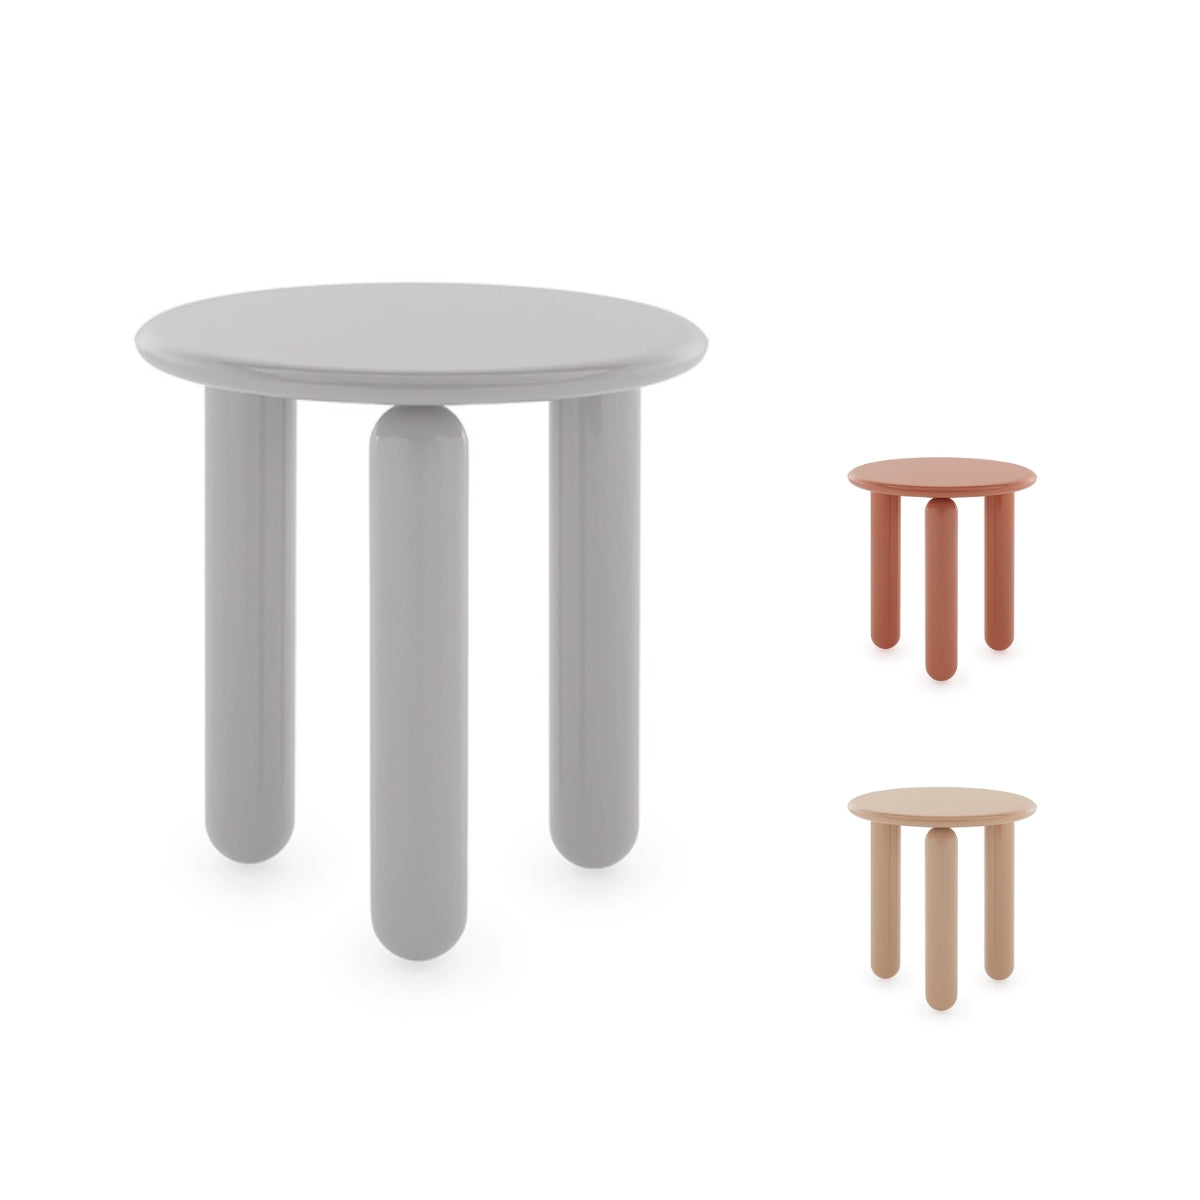 Undique Mas Table Small - Kartell